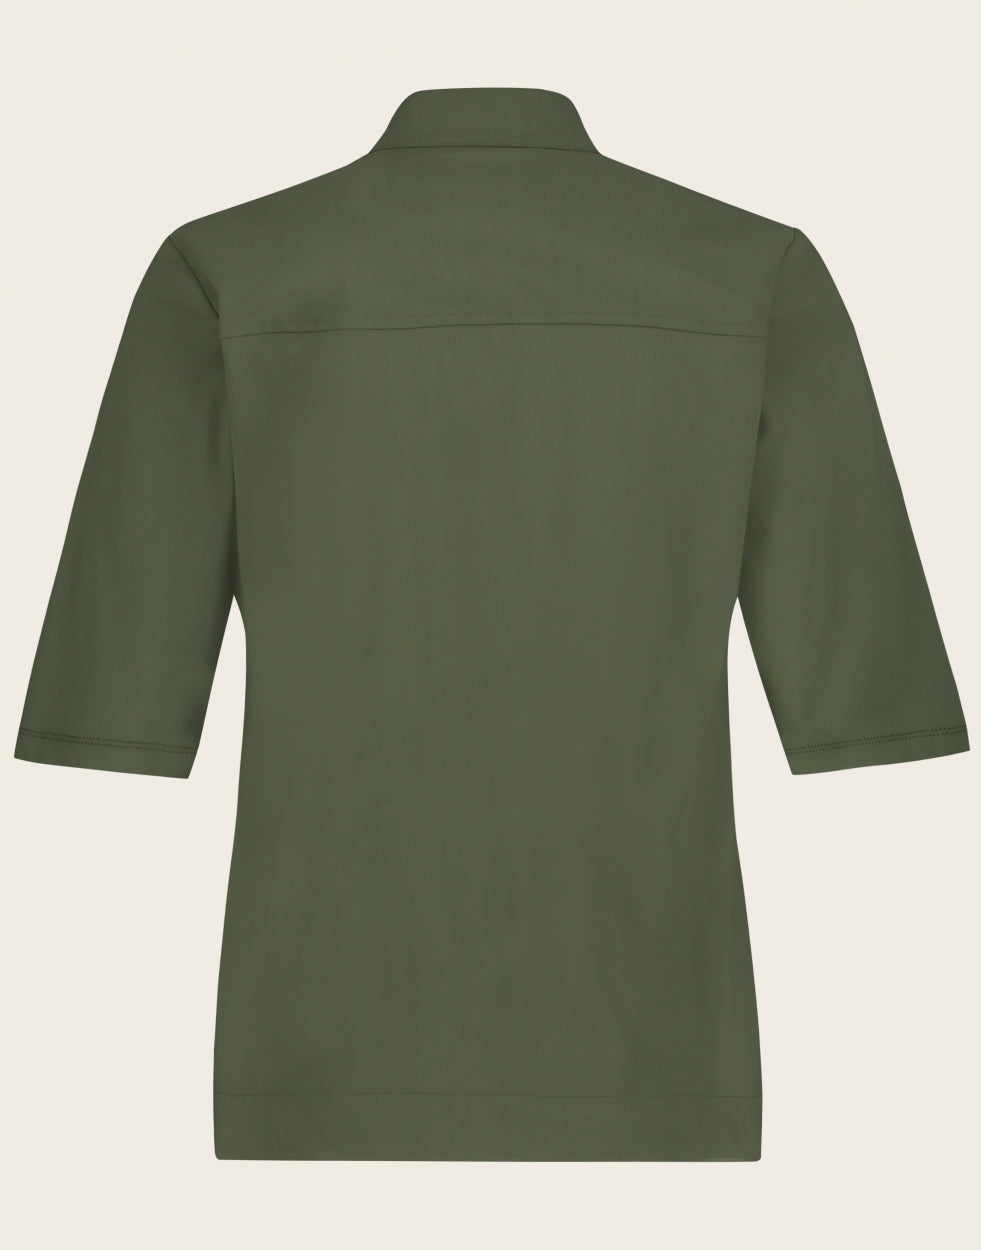 Top Atlas Technical Jersey | Army